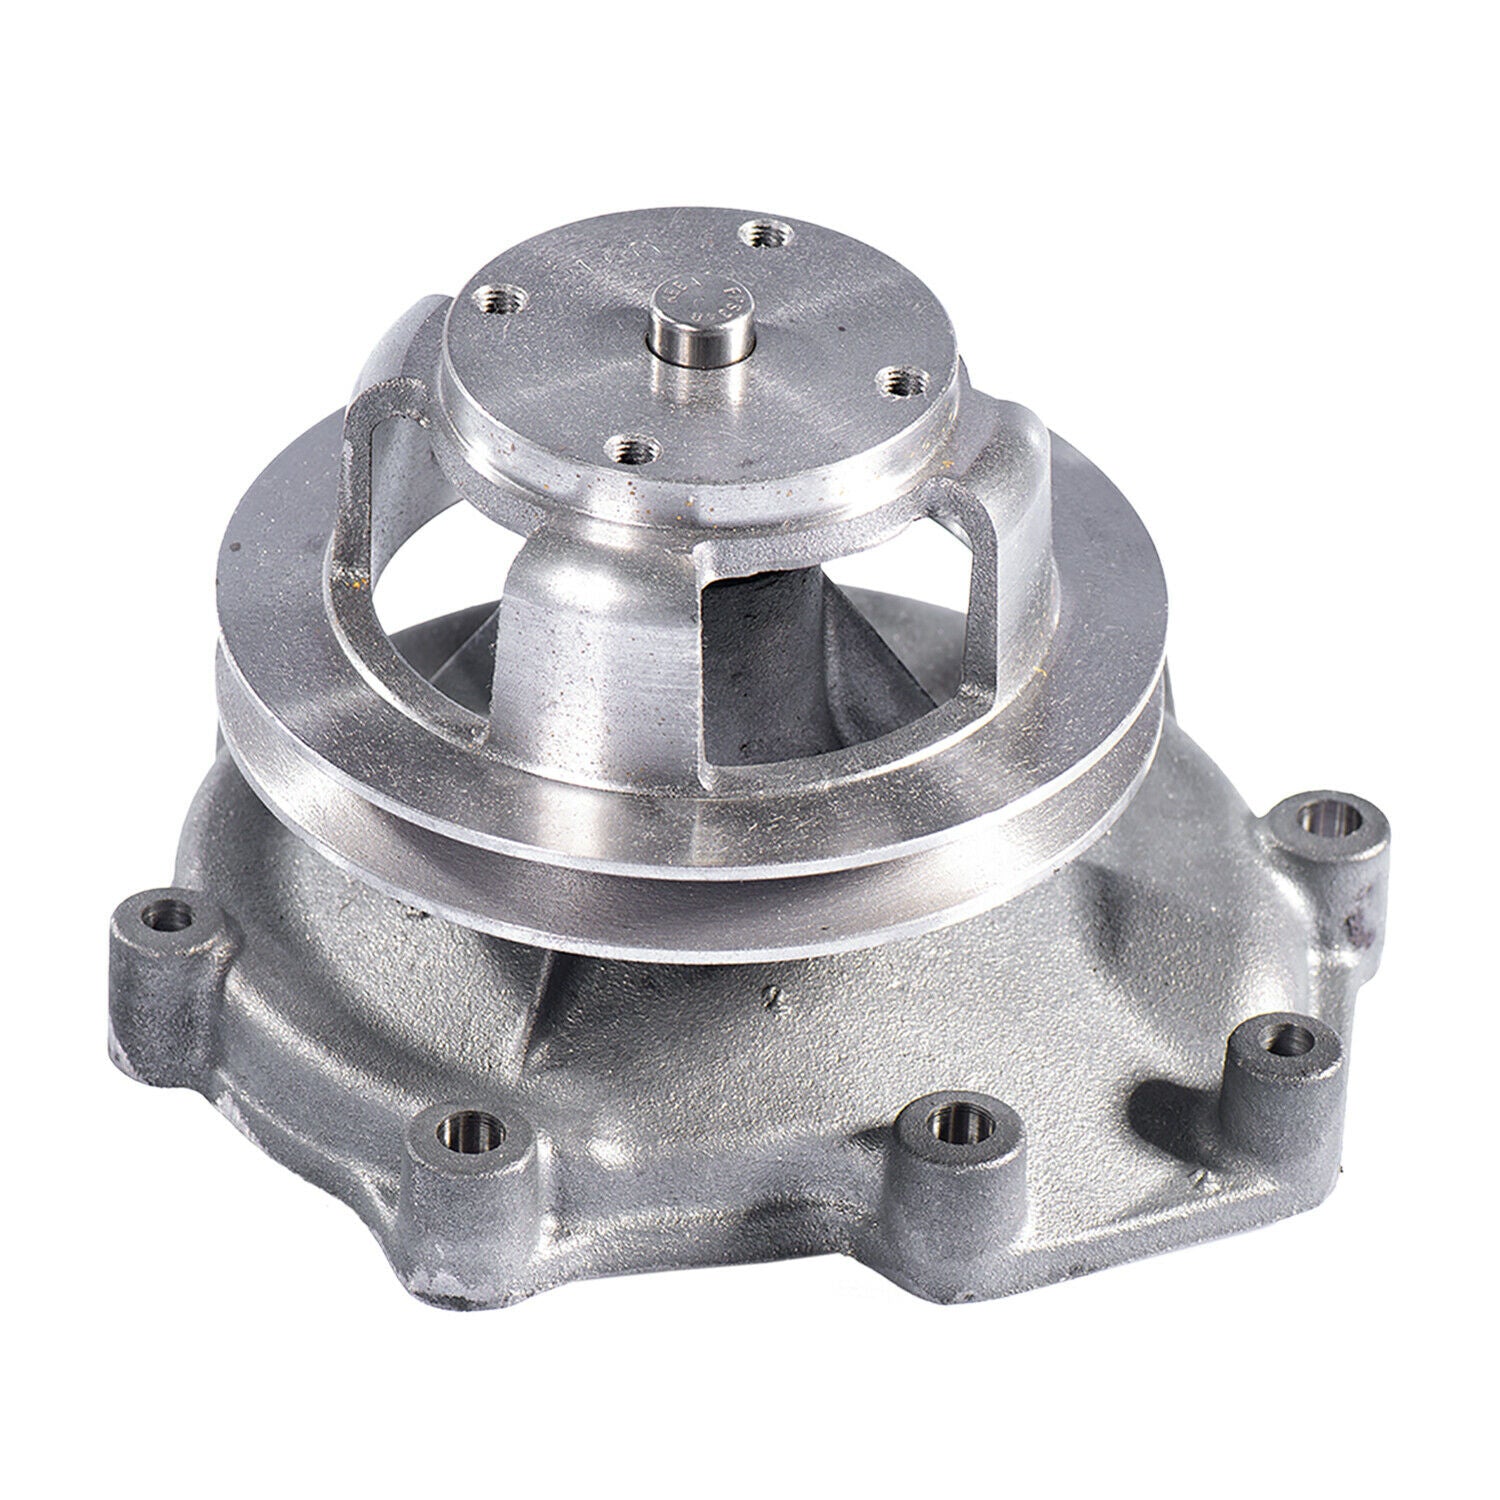 Complete Tractor Pressure Plate for Ford/ Holland 2000, 2110, 2120, 2150 RE42515; 1412-6056